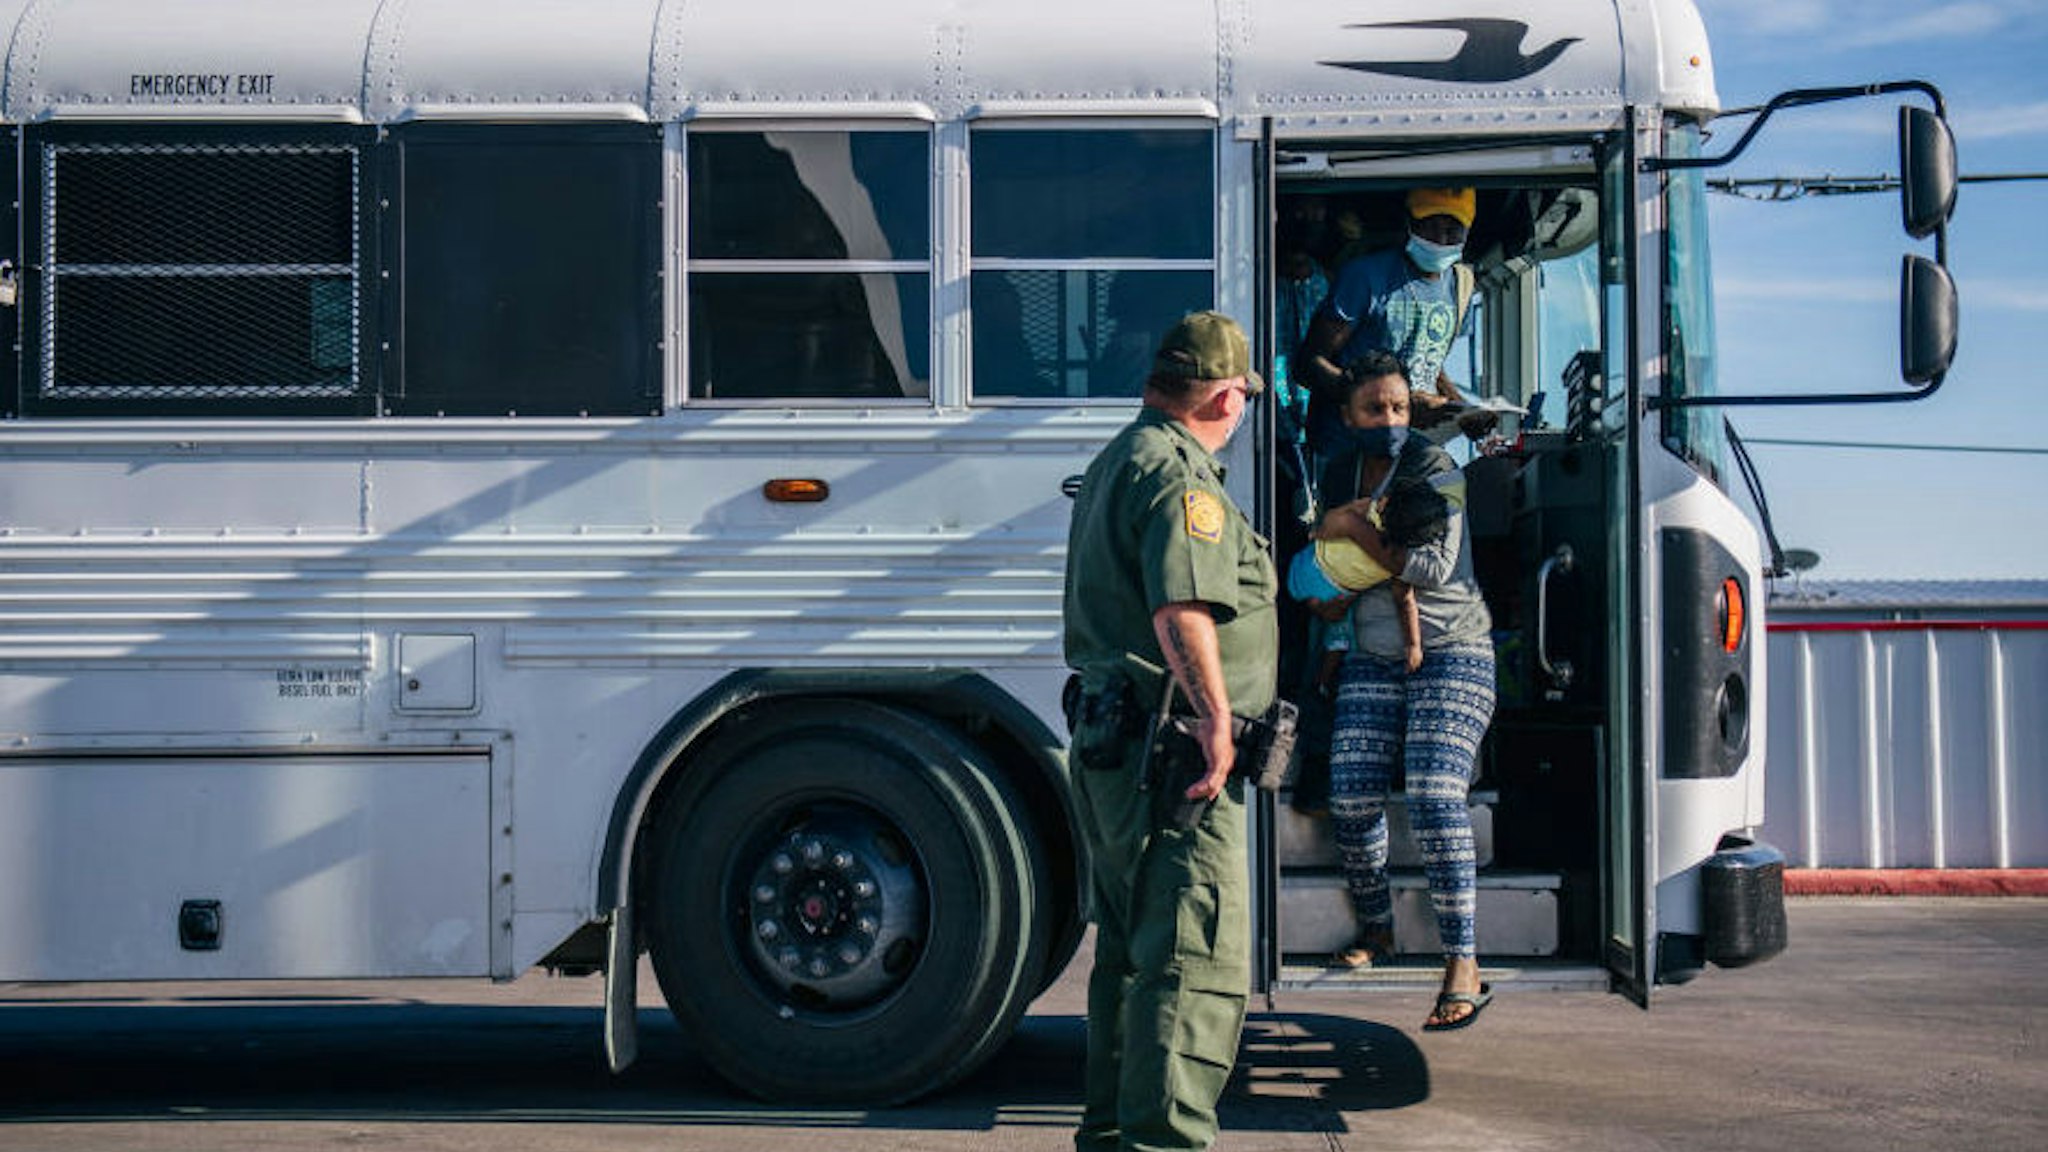 DEL RIO, TEXAS - SEPTEMBER 22: Migrants exit a Border Patrol bus and prepare to be received by the Val Verde Humanitarian Coalition after crossing the Rio Grande on September 22, 2021 in Del Rio, Texas. Thousands of immigrants, mostly from Haiti, seeking asylum have crossed the Rio Grande into the United States. Families are living in makeshift tents under the international bridge while waiting to be processed into the system. U.S. immigration authorities have been deporting planeloads of migrants directly to Haiti while others have crossed the Rio Grande back into Mexico.